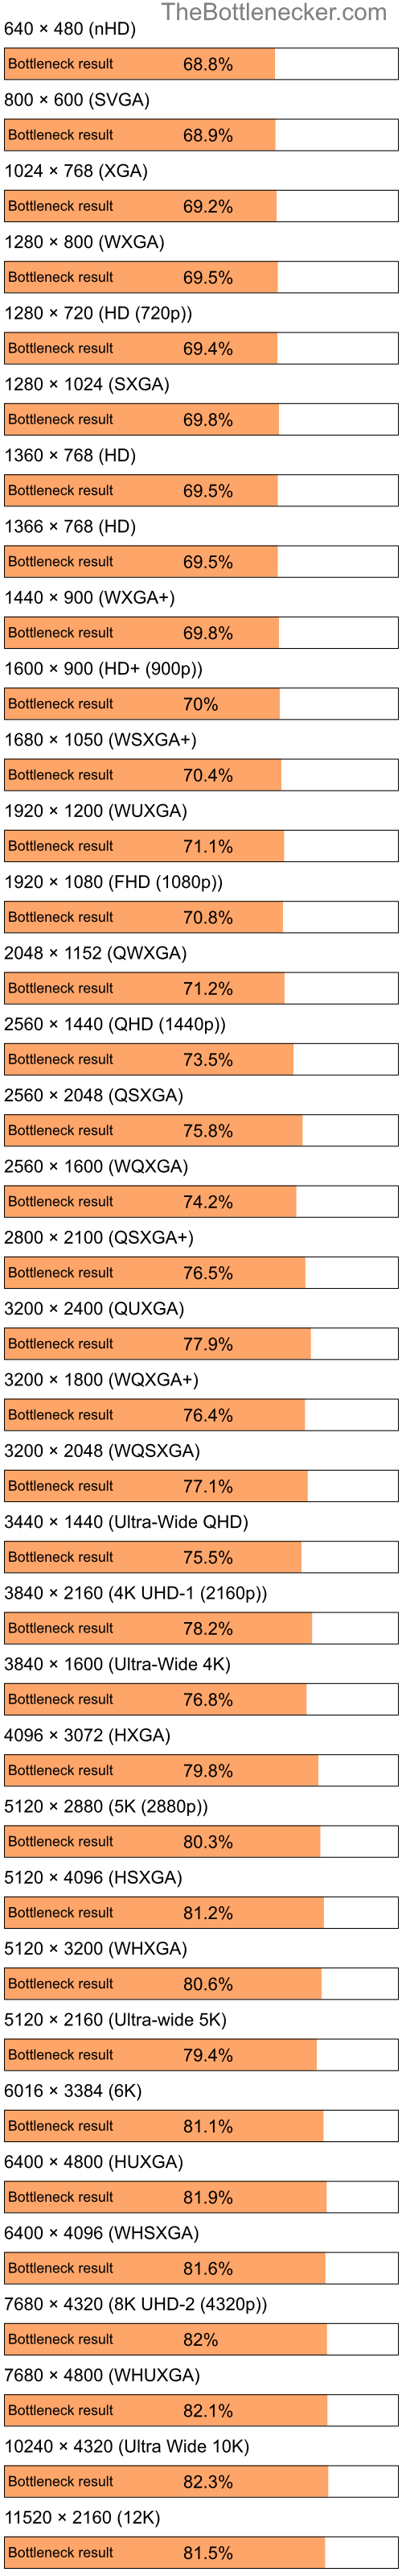 Bottleneck results by resolution for Intel Pentium 4 and NVIDIA GeForce 6610 XL in Graphic Card Intense Tasks